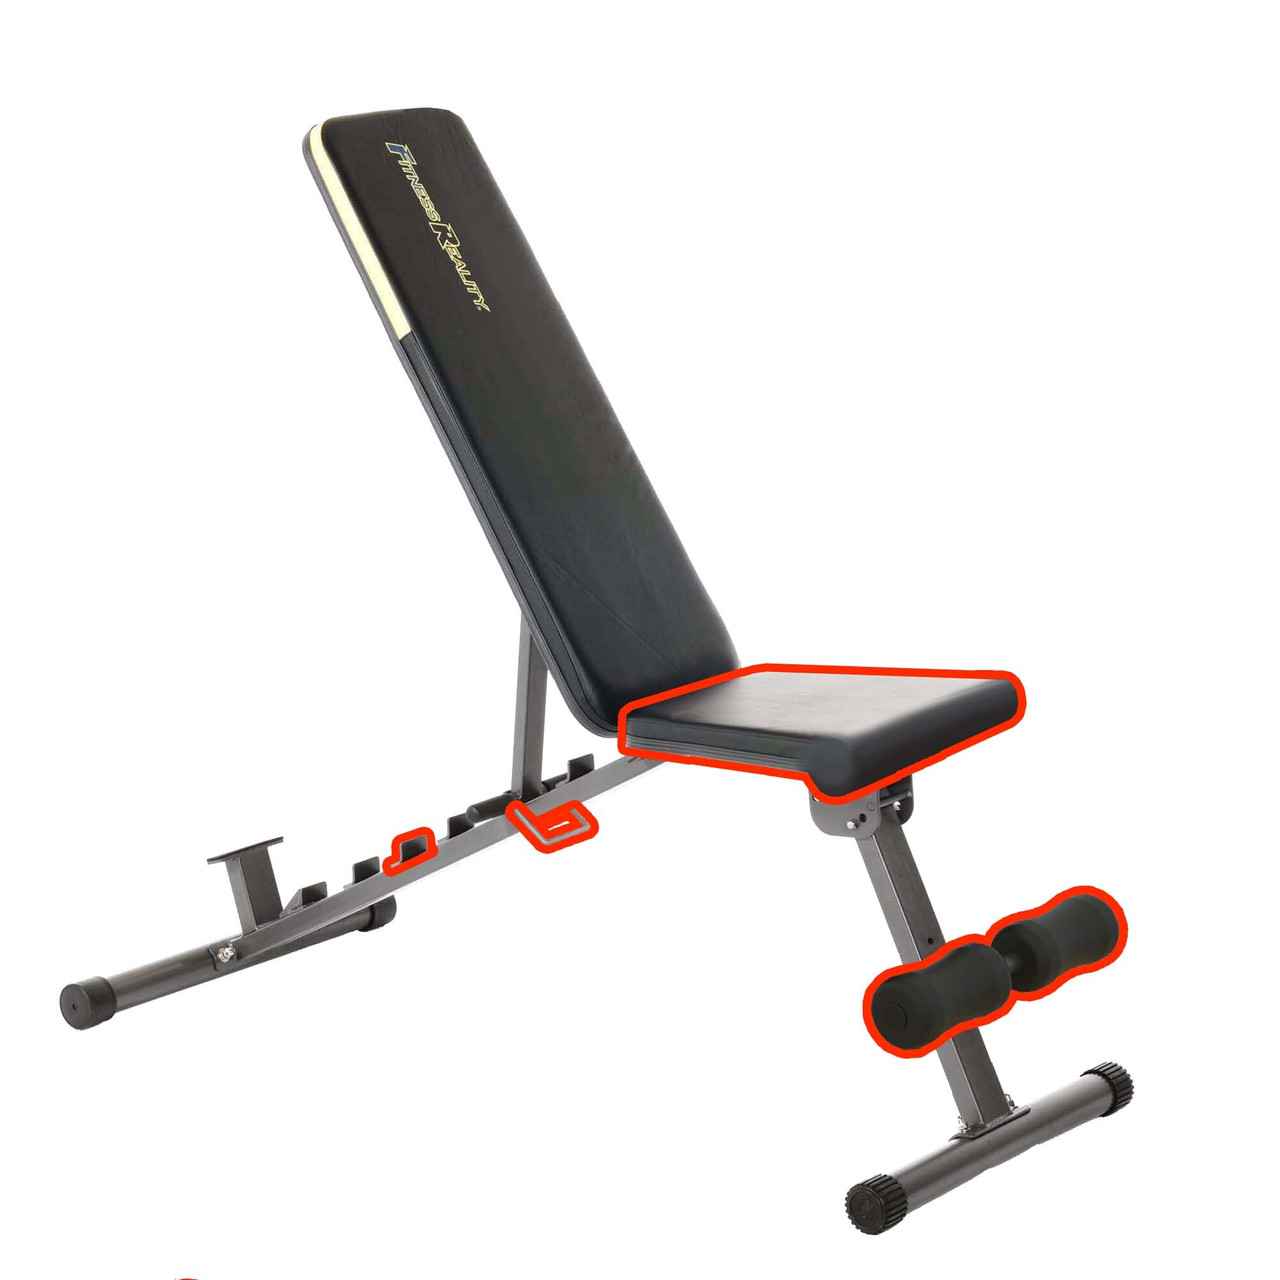 Auto Bench Weight Gap Fitness Reality No 14-Position Adjustable